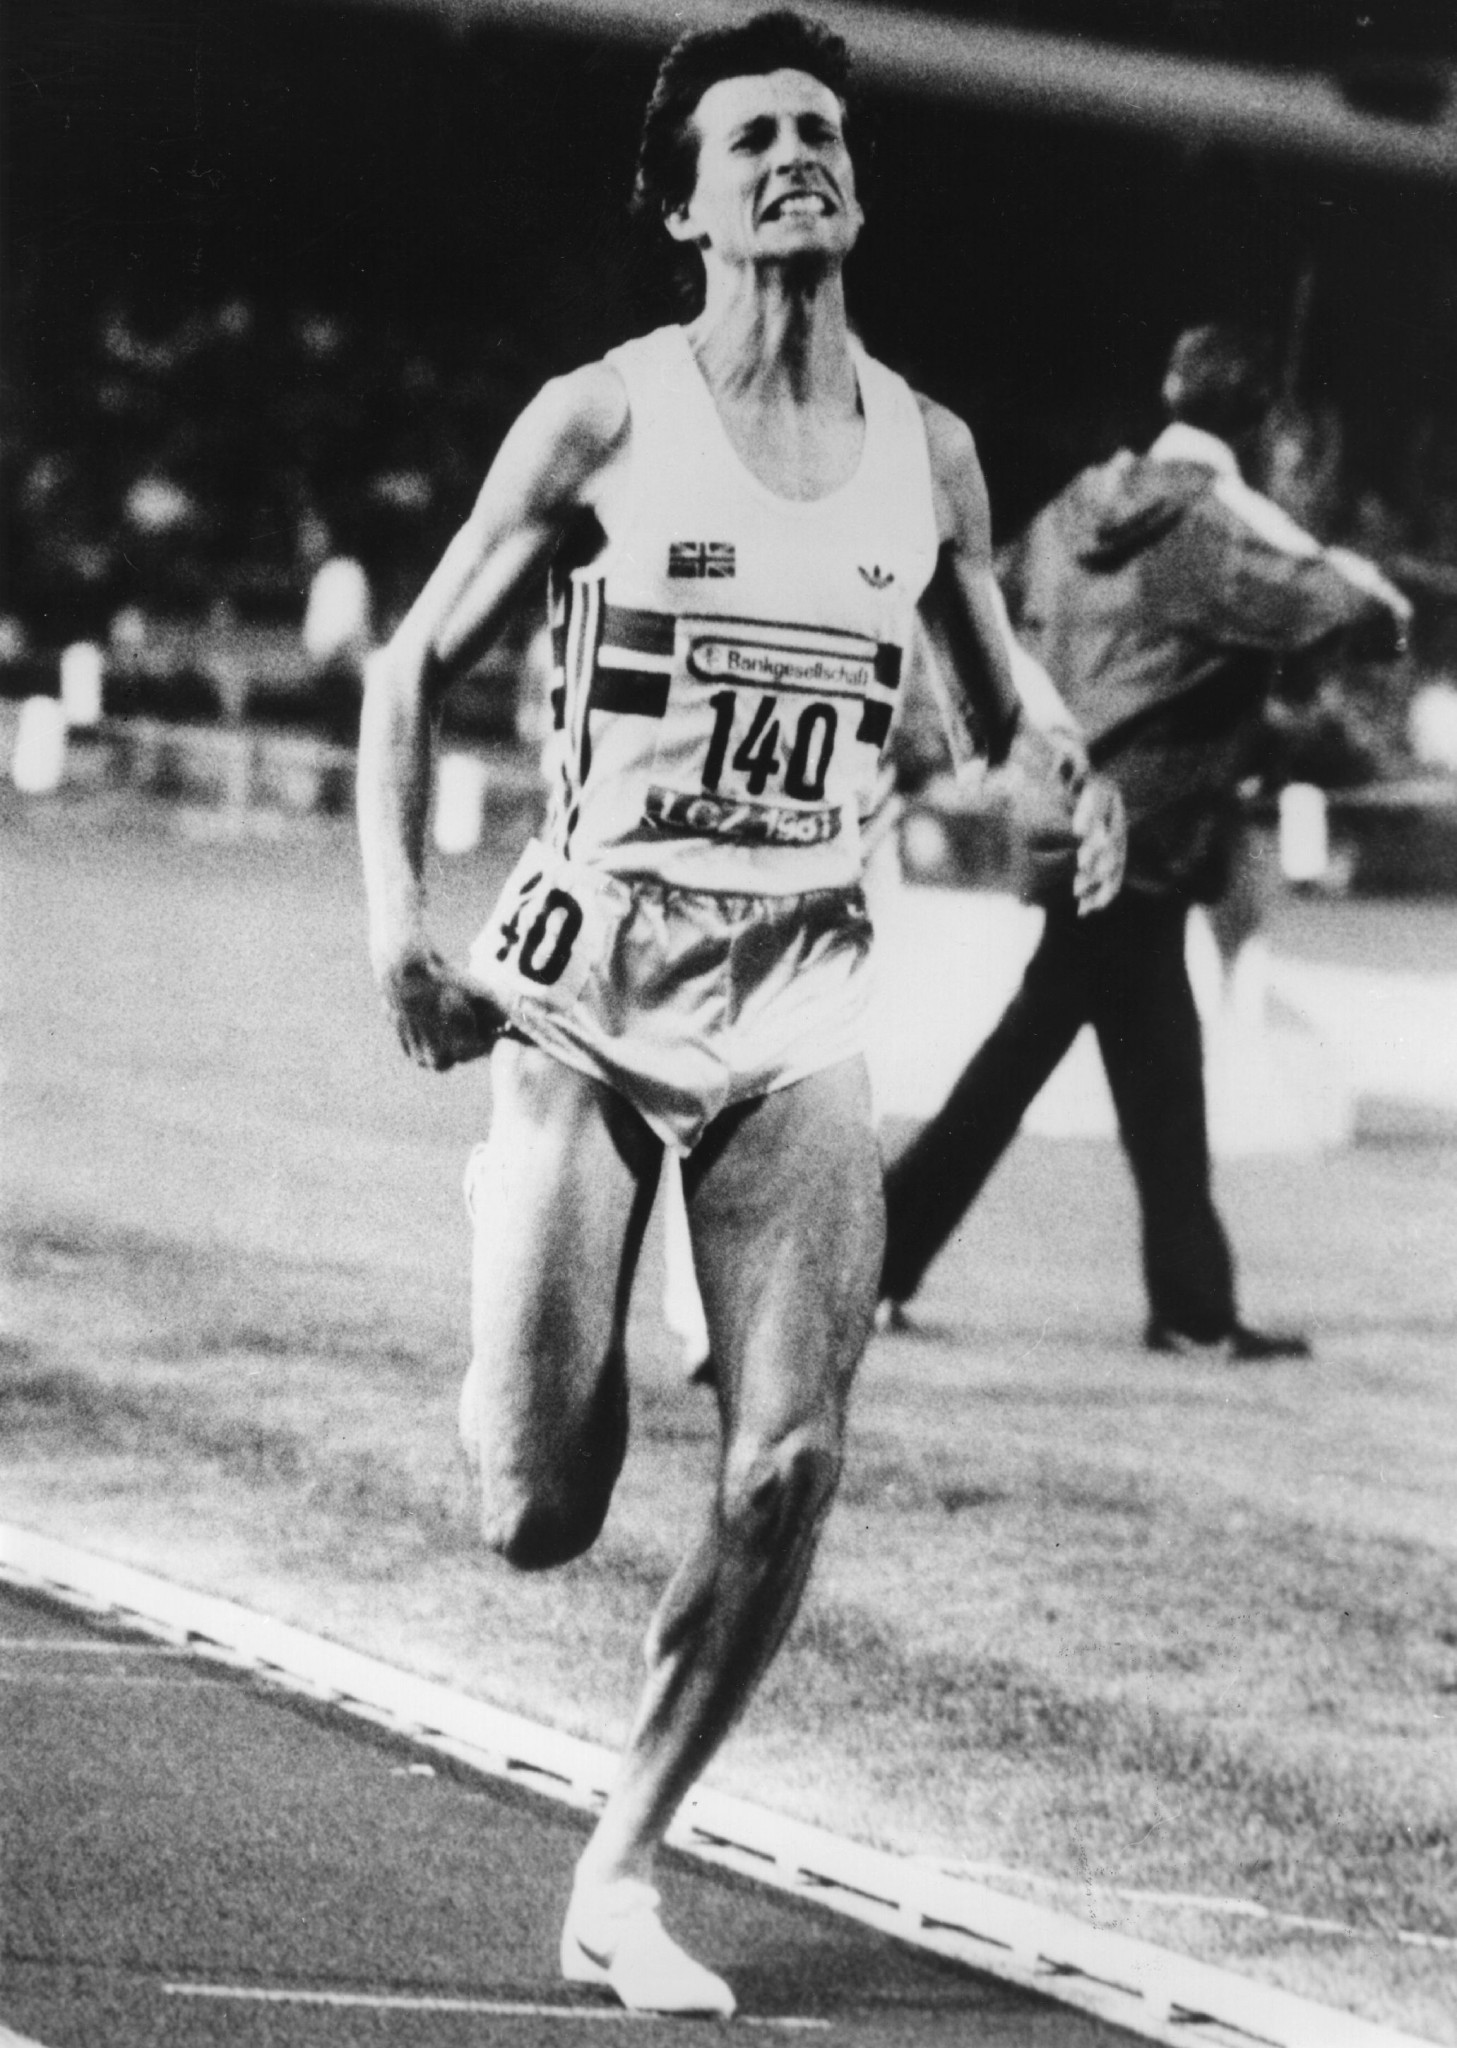 IAAF President Sebastian Coe set two world records at meetings in Zurich organised by Andreas Brugger, including the mile in 1981 - a total of 19 were set between 1973 and 2000 ©Getty Images